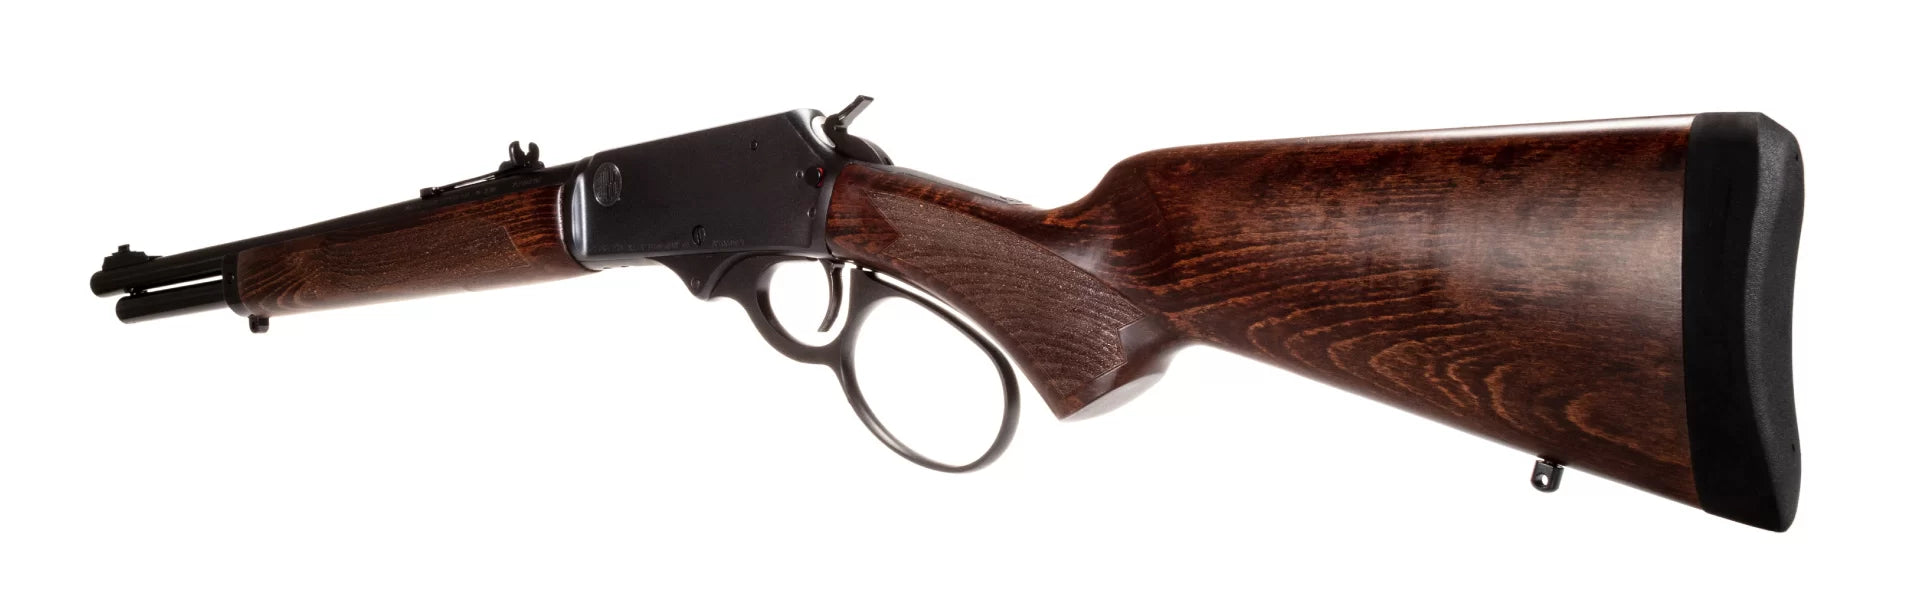 ROSSI - R95 TRAPPER WALNUT 30-30 LEVER ACTION - 16.5" - IN STORE NOW